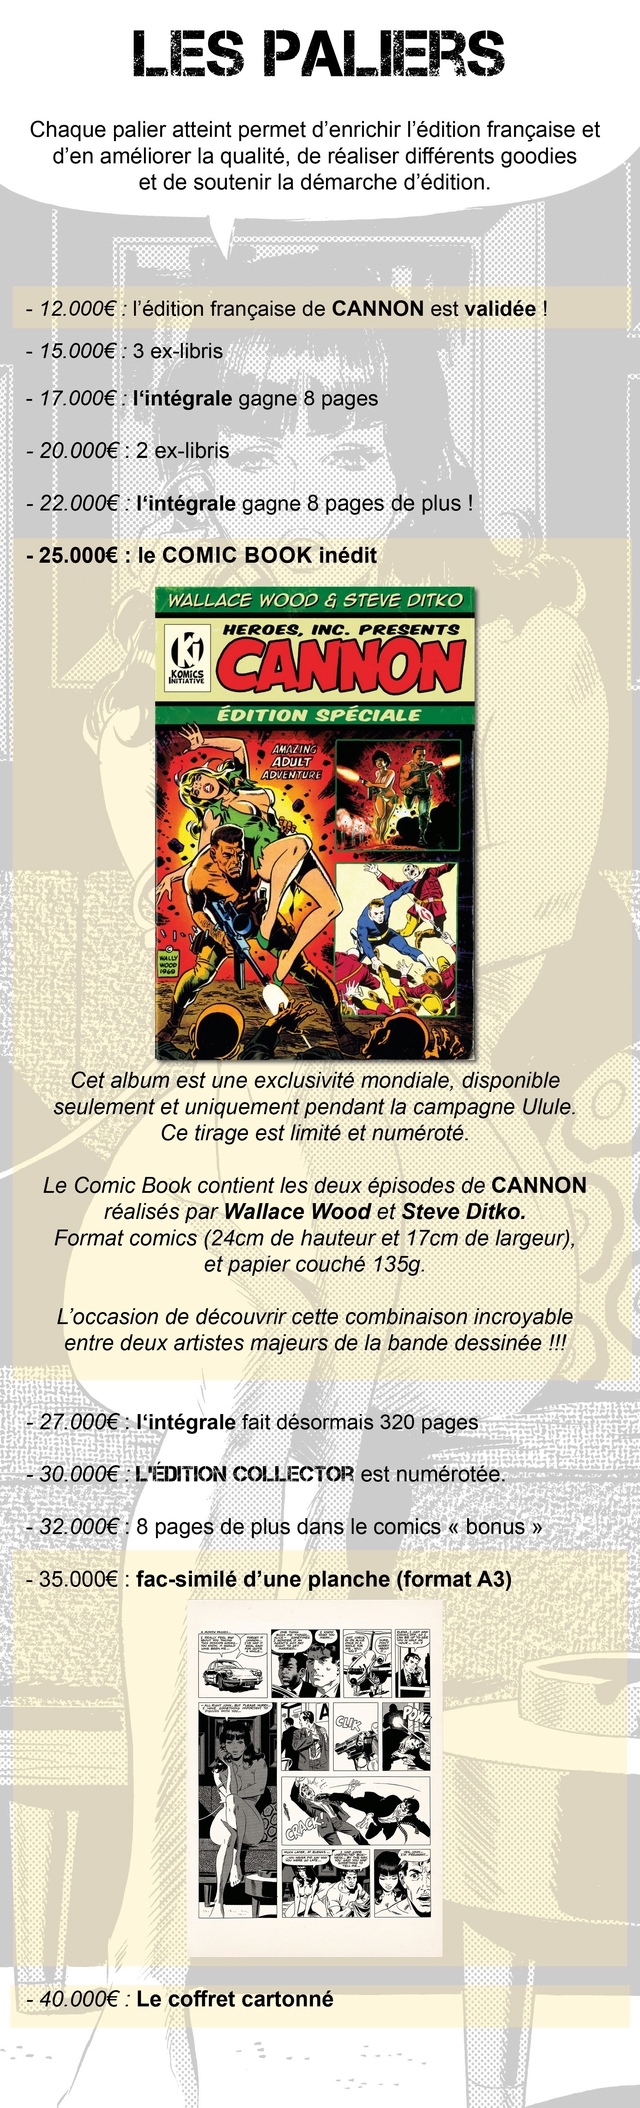 Collectionneurs de Wally Wood - Page 6 Pc070413